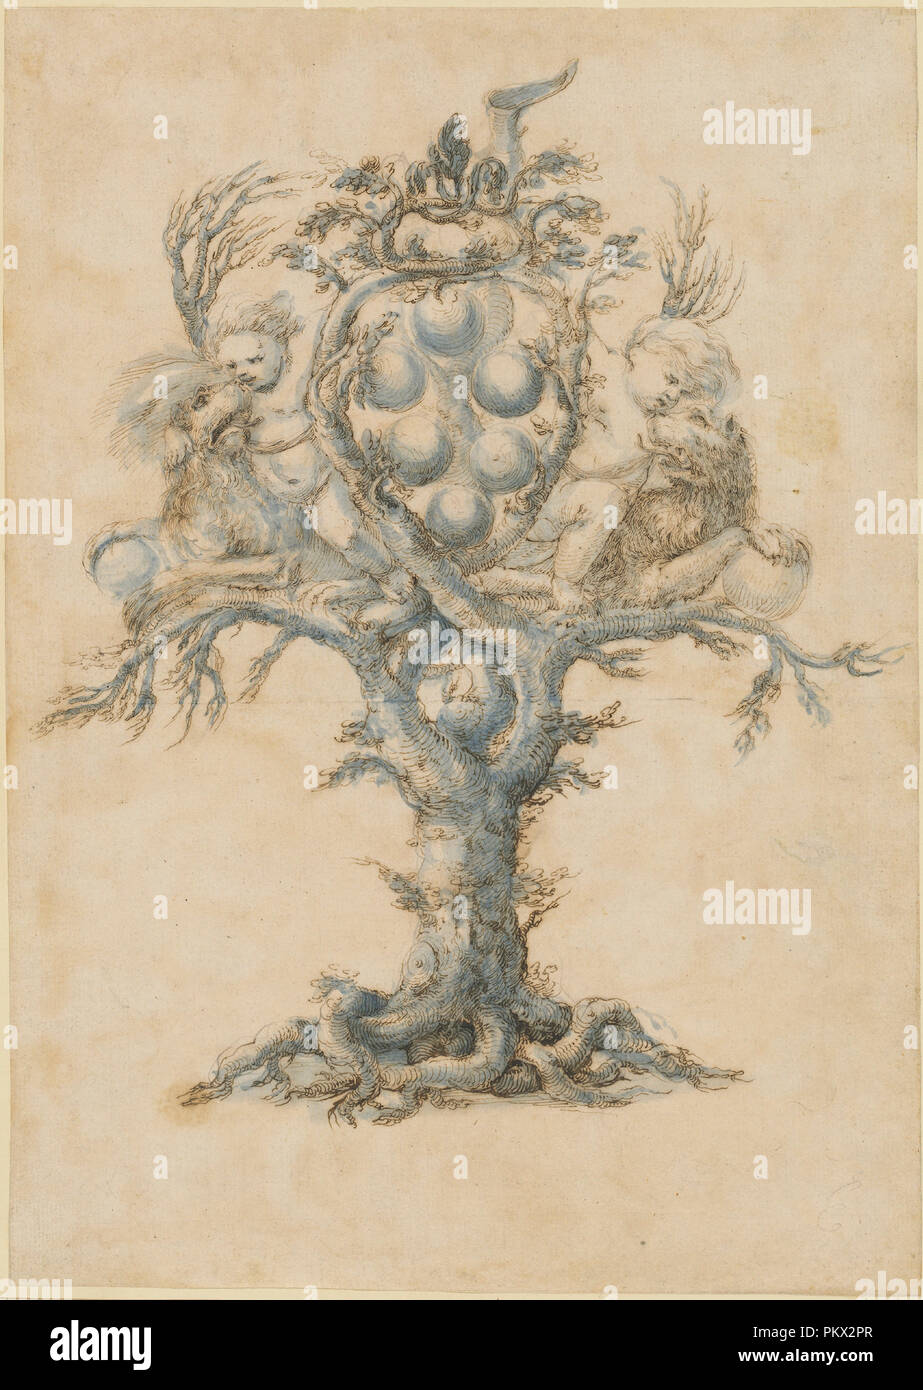 A Wine Decanter with Lions and Putti. Dated: 1650/1670. Dimensions: sheet: 33.8 x 24.1 cm (13 5/16 x 9 1/2 in.). Medium: pen and brown ink with blue wash over graphite on light beige laid paper. Museum: National Gallery of Art, Washington DC. Author: Master of the Medici Banquet Decanters. Stock Photo